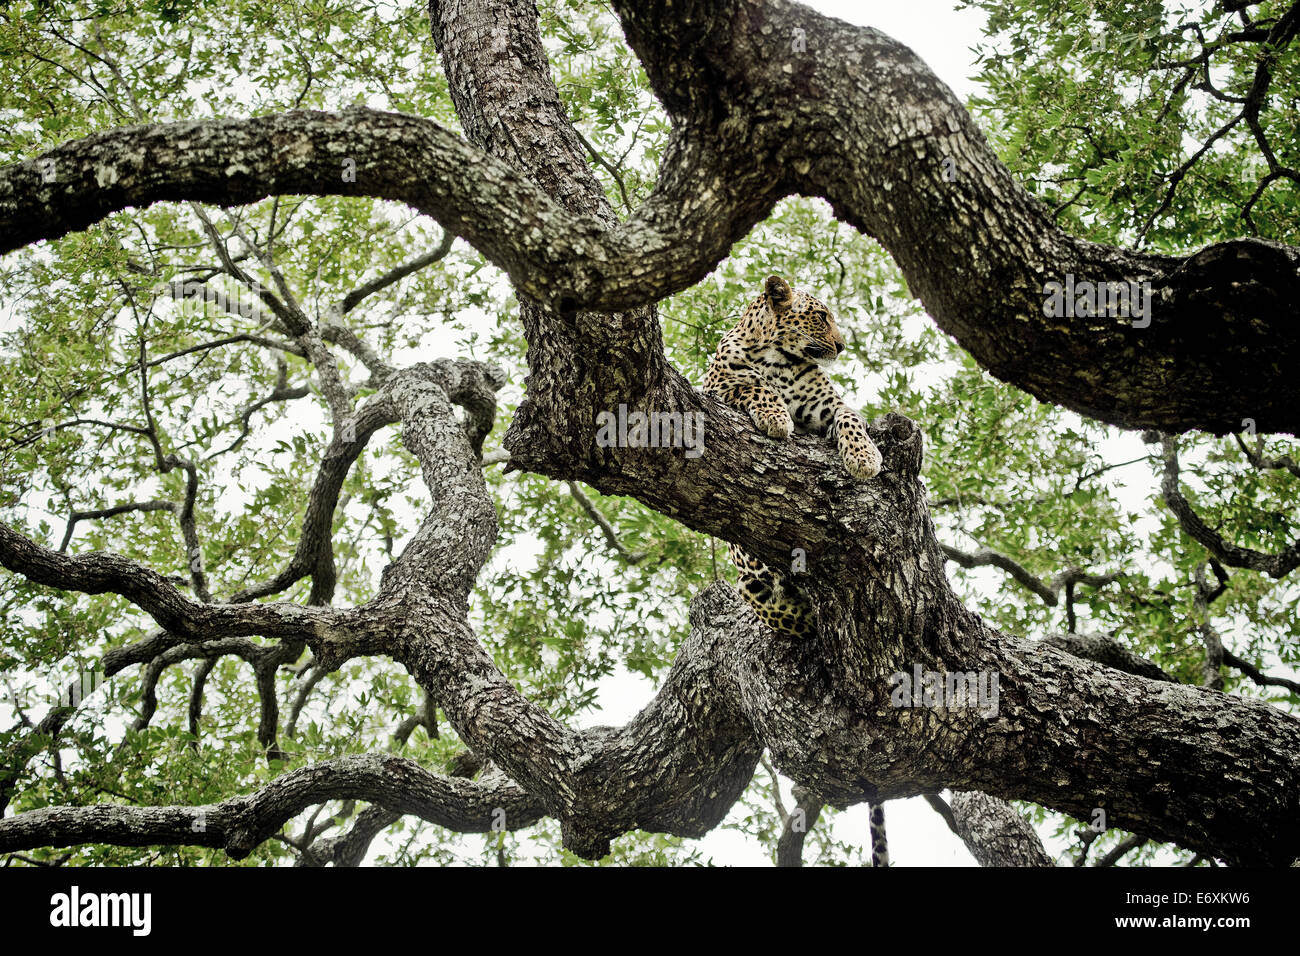 Leopard in an ebony tree, Sabi Sands Game Reserve, South Africa, Africa Stock Photo